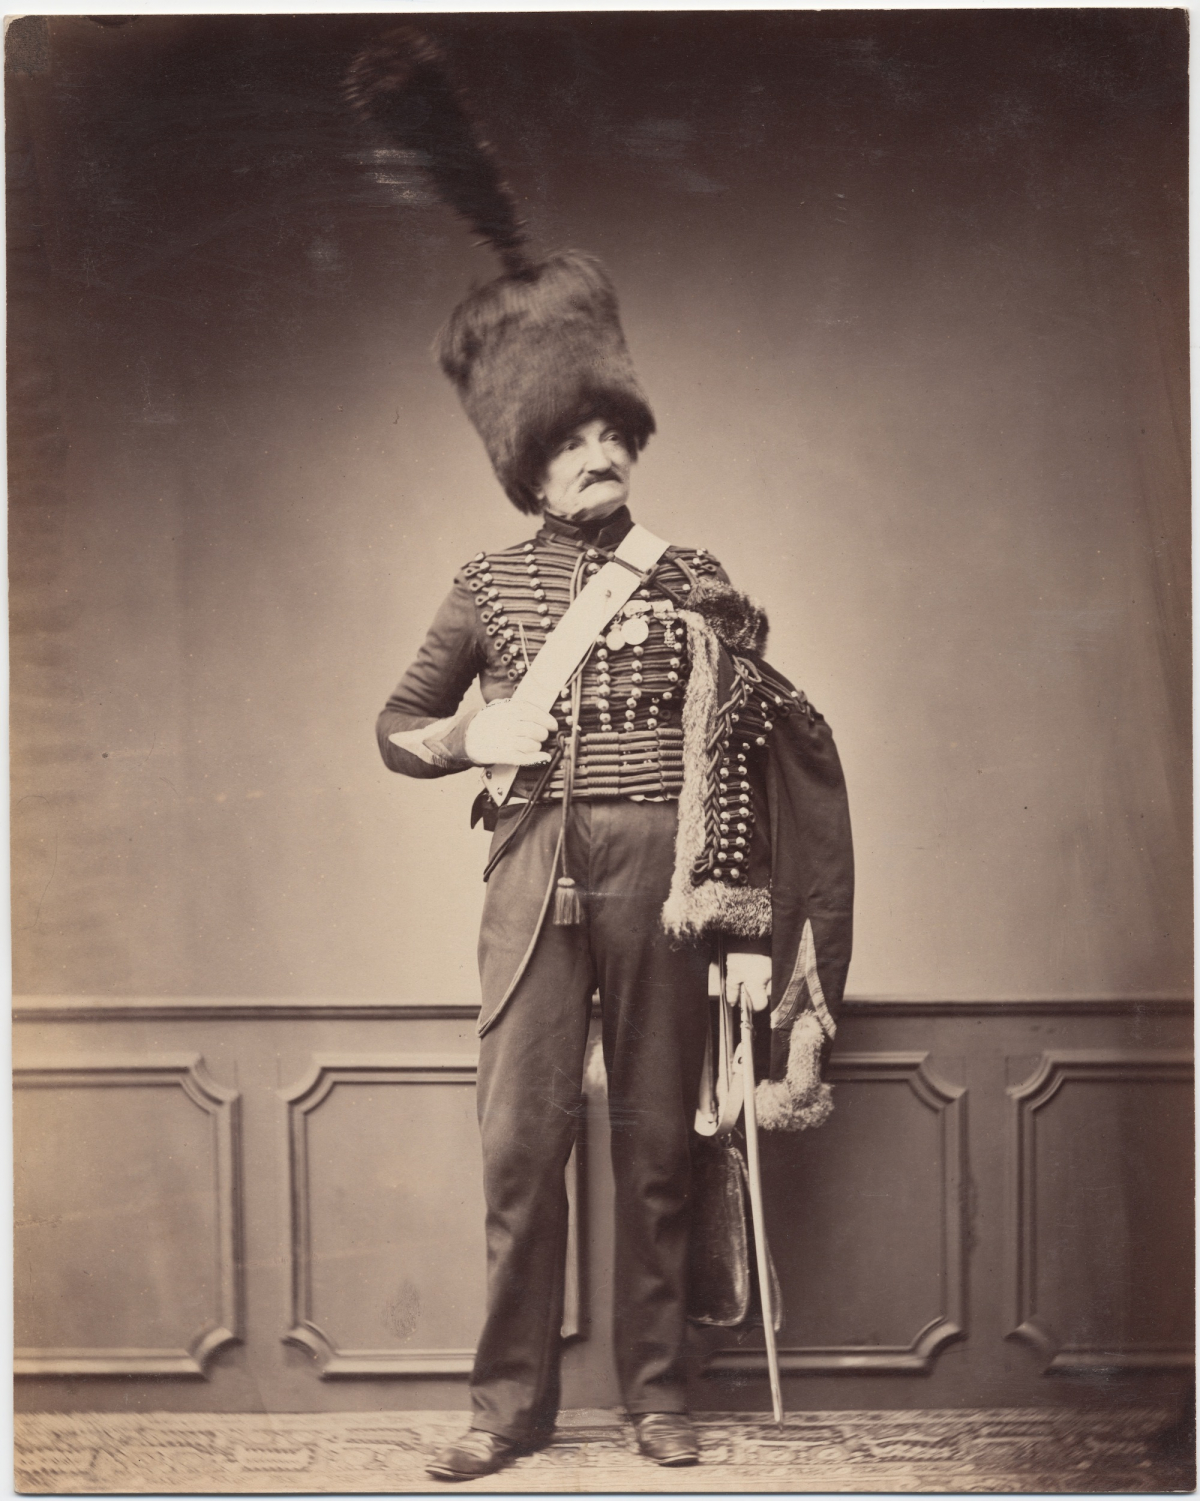 Monsieur Maire, 7th Hussars